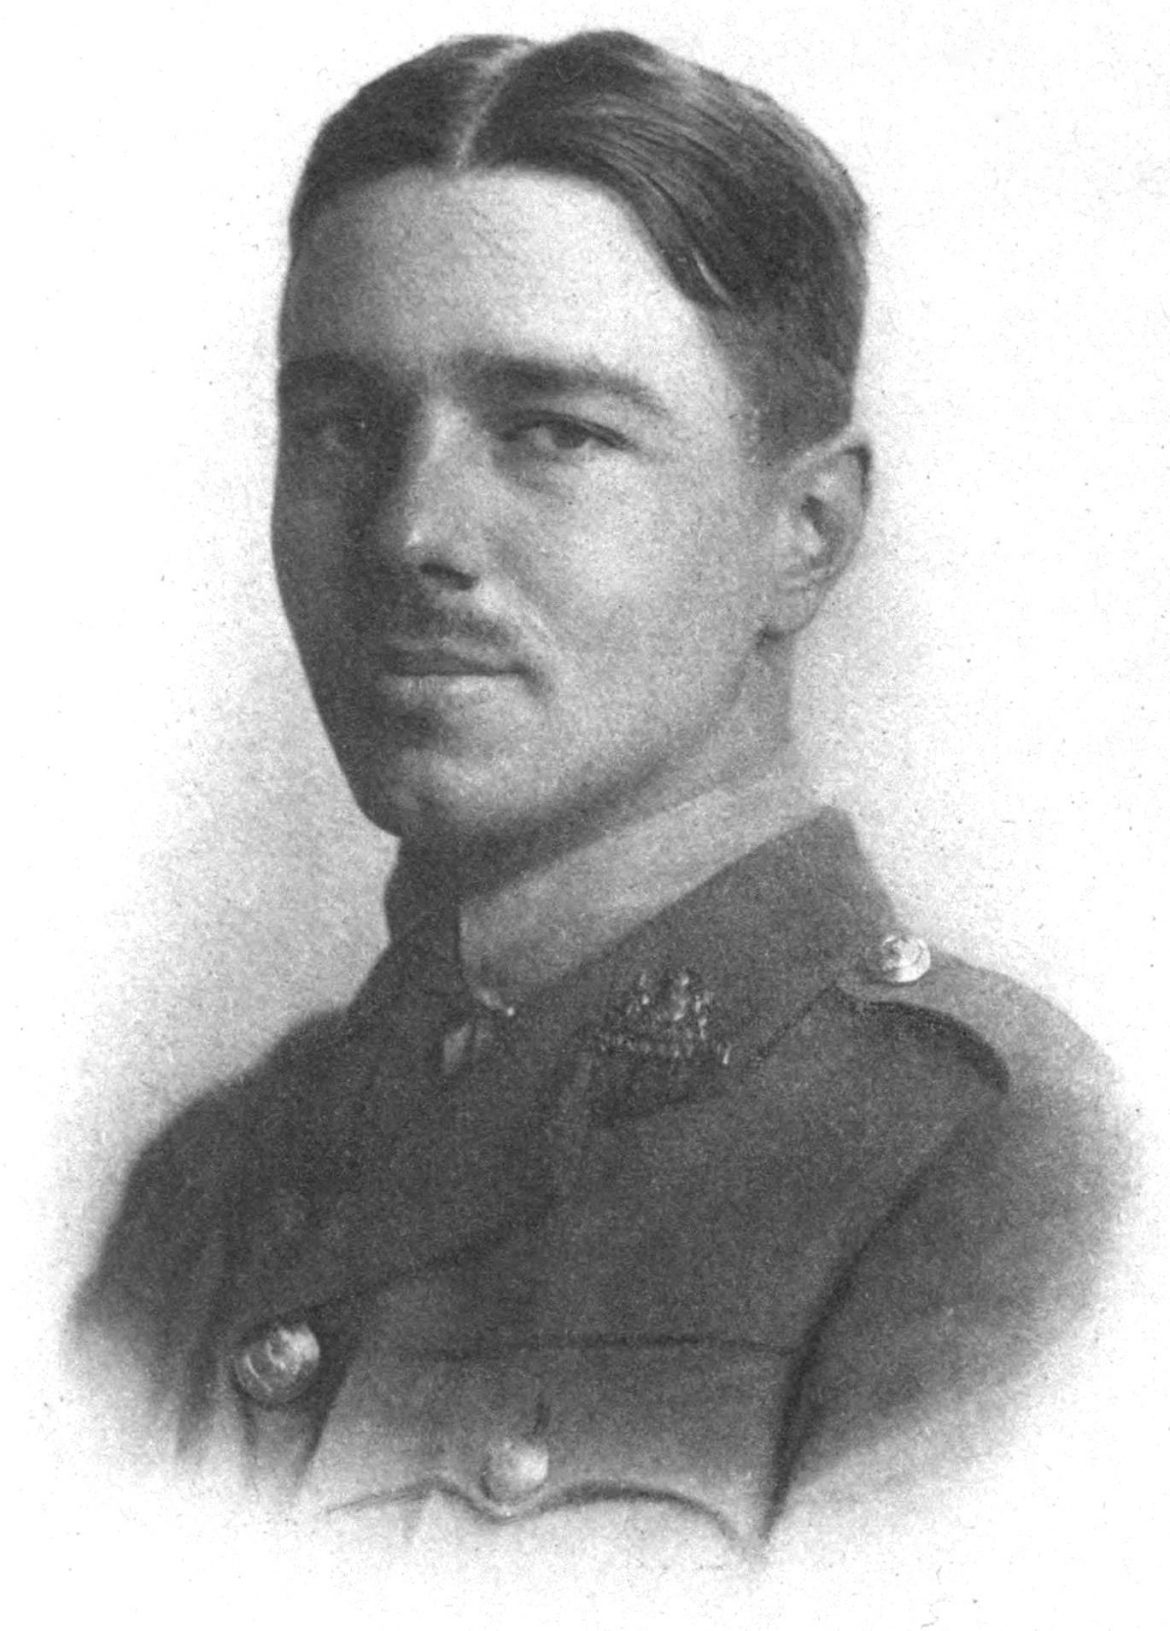 Black and white photograph of Wilfred Owen wearing military uniform.